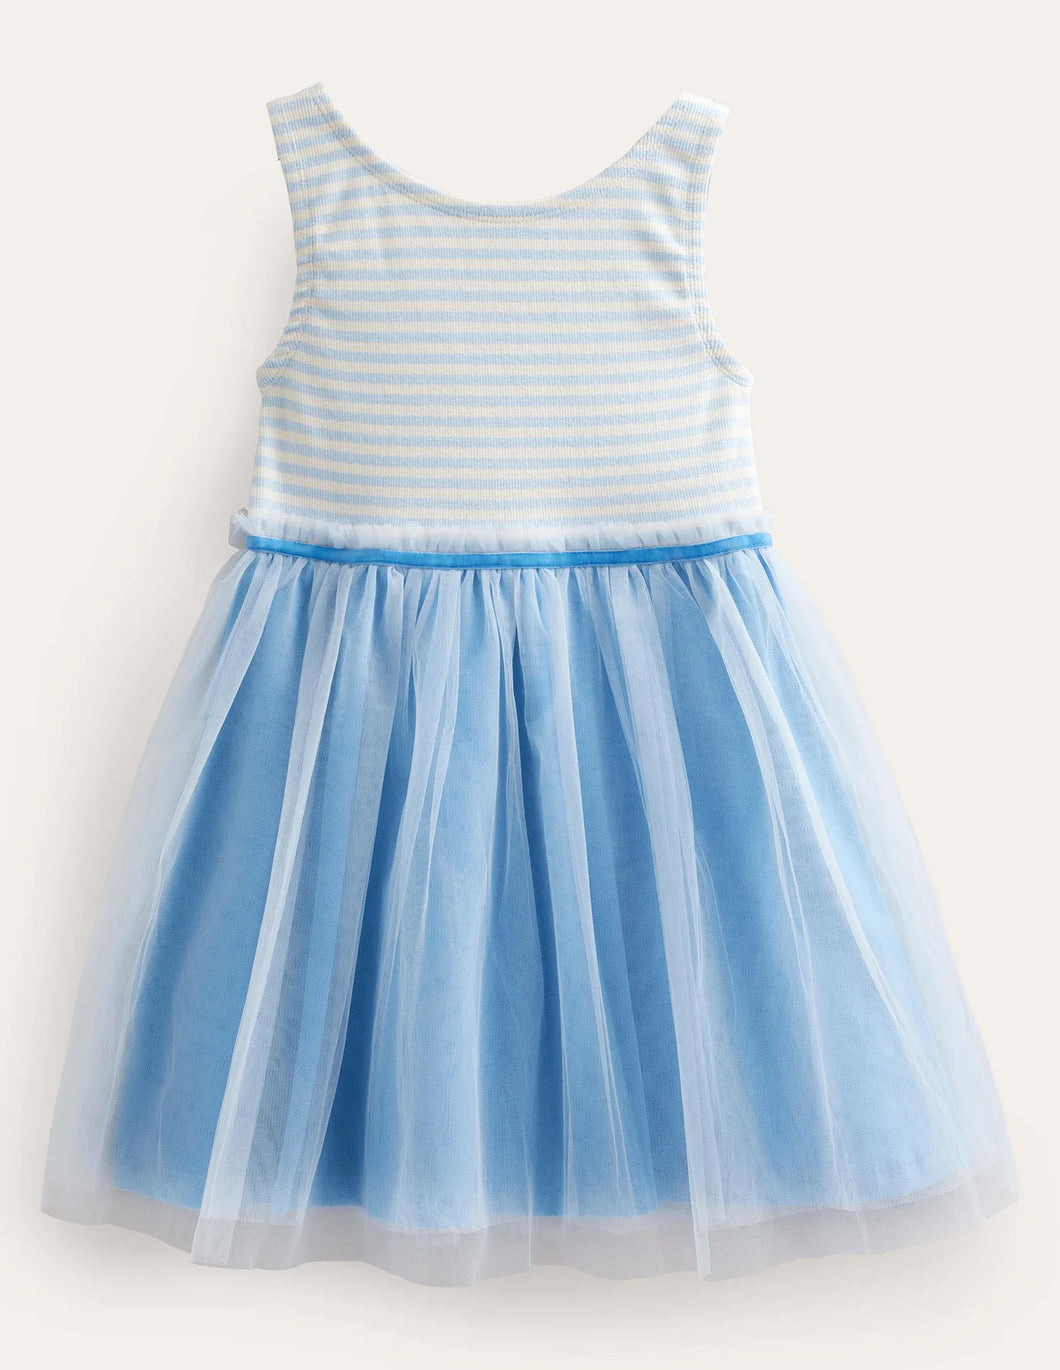 NWT Mini Boden Tulle Jersey Dress